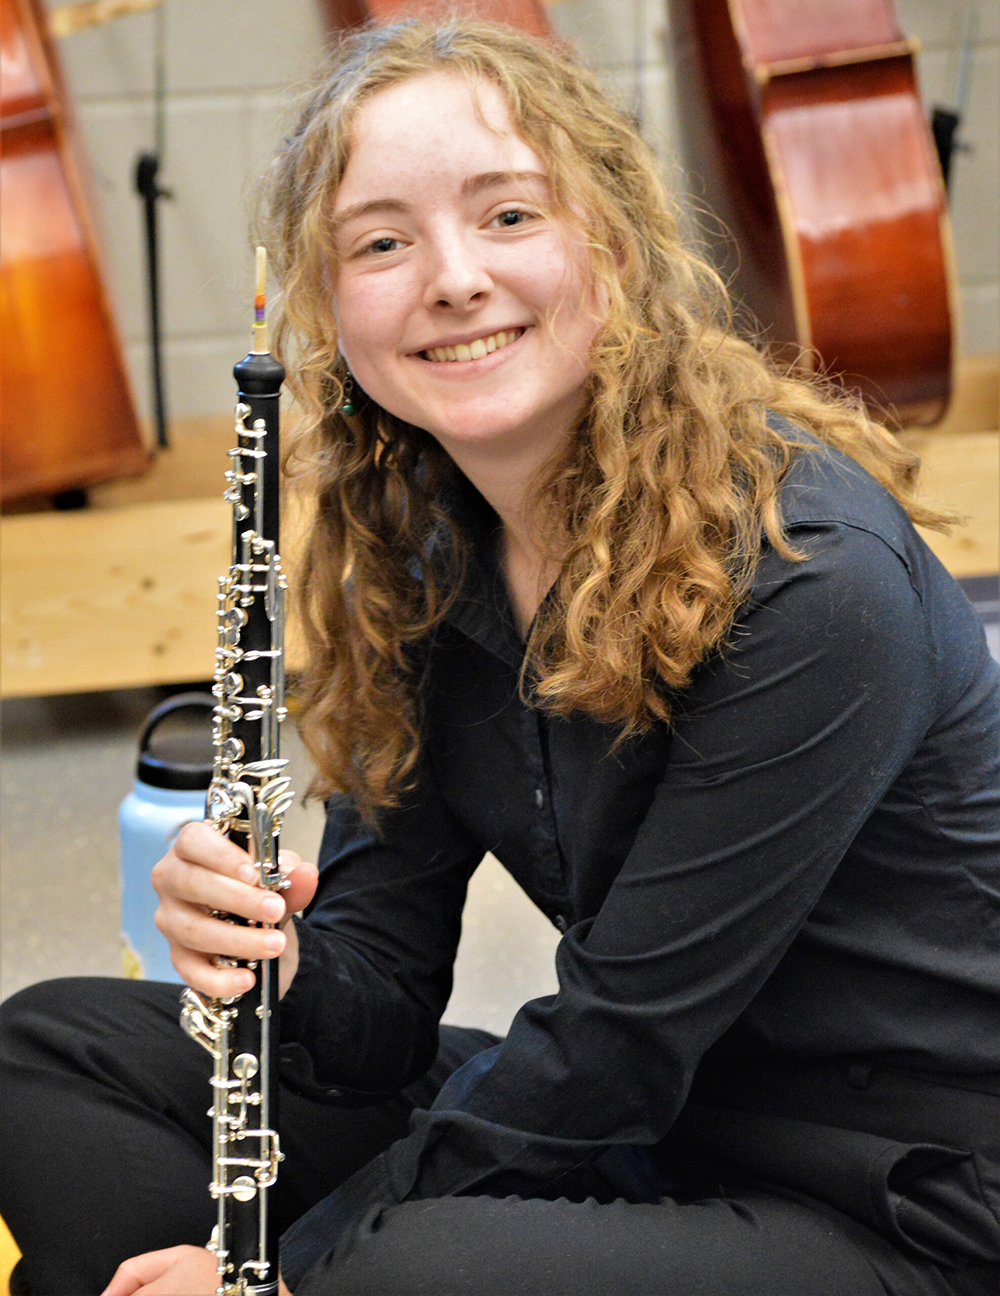 LSYO oboe player